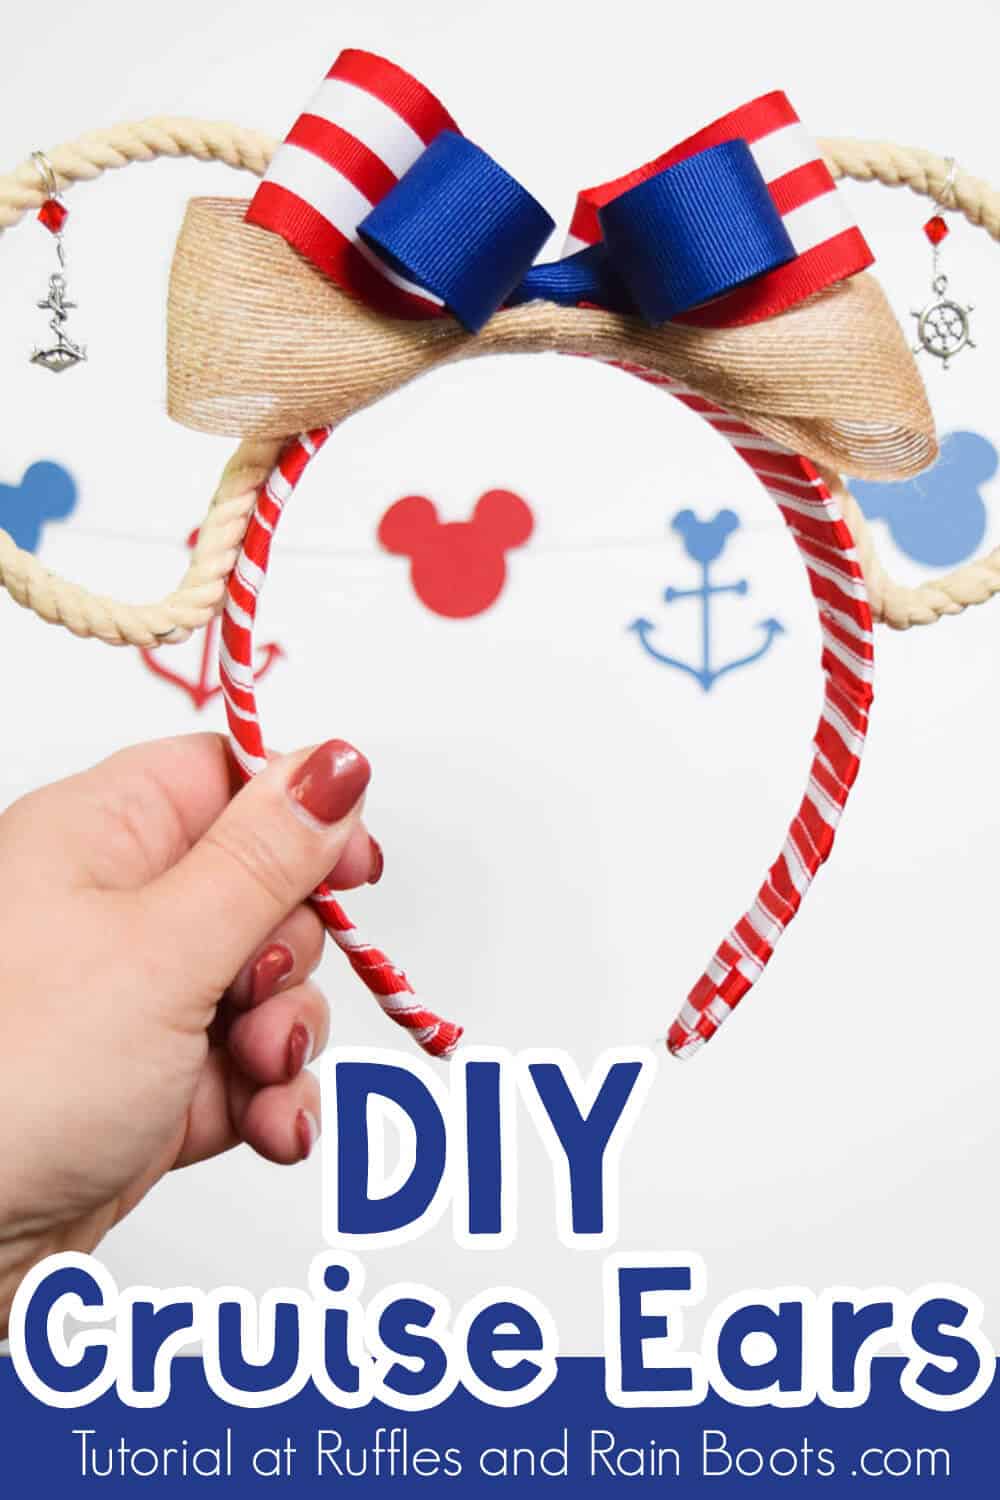 red white and blue rope Disney cruise ears on white background with cruise SVG cut outs